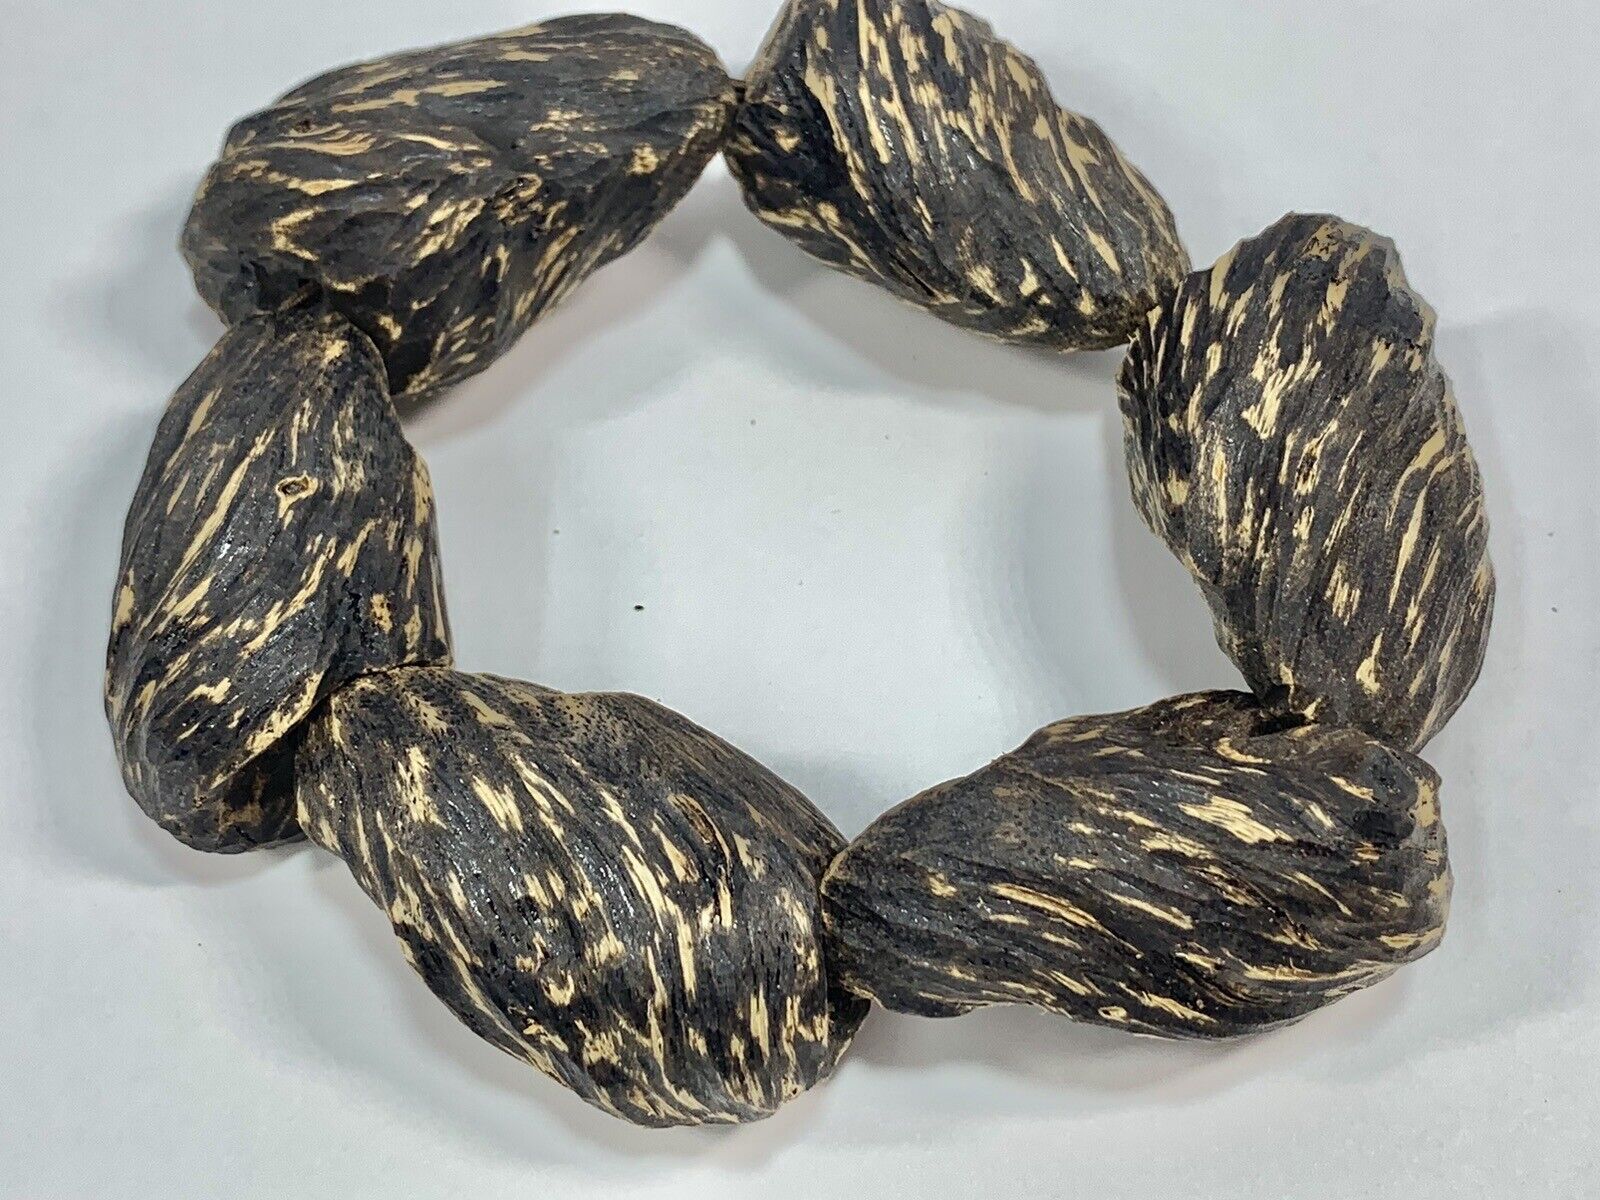 Super Large And High Quality Unusual Chengxiang Agarwood Sink In Water Bracelet 